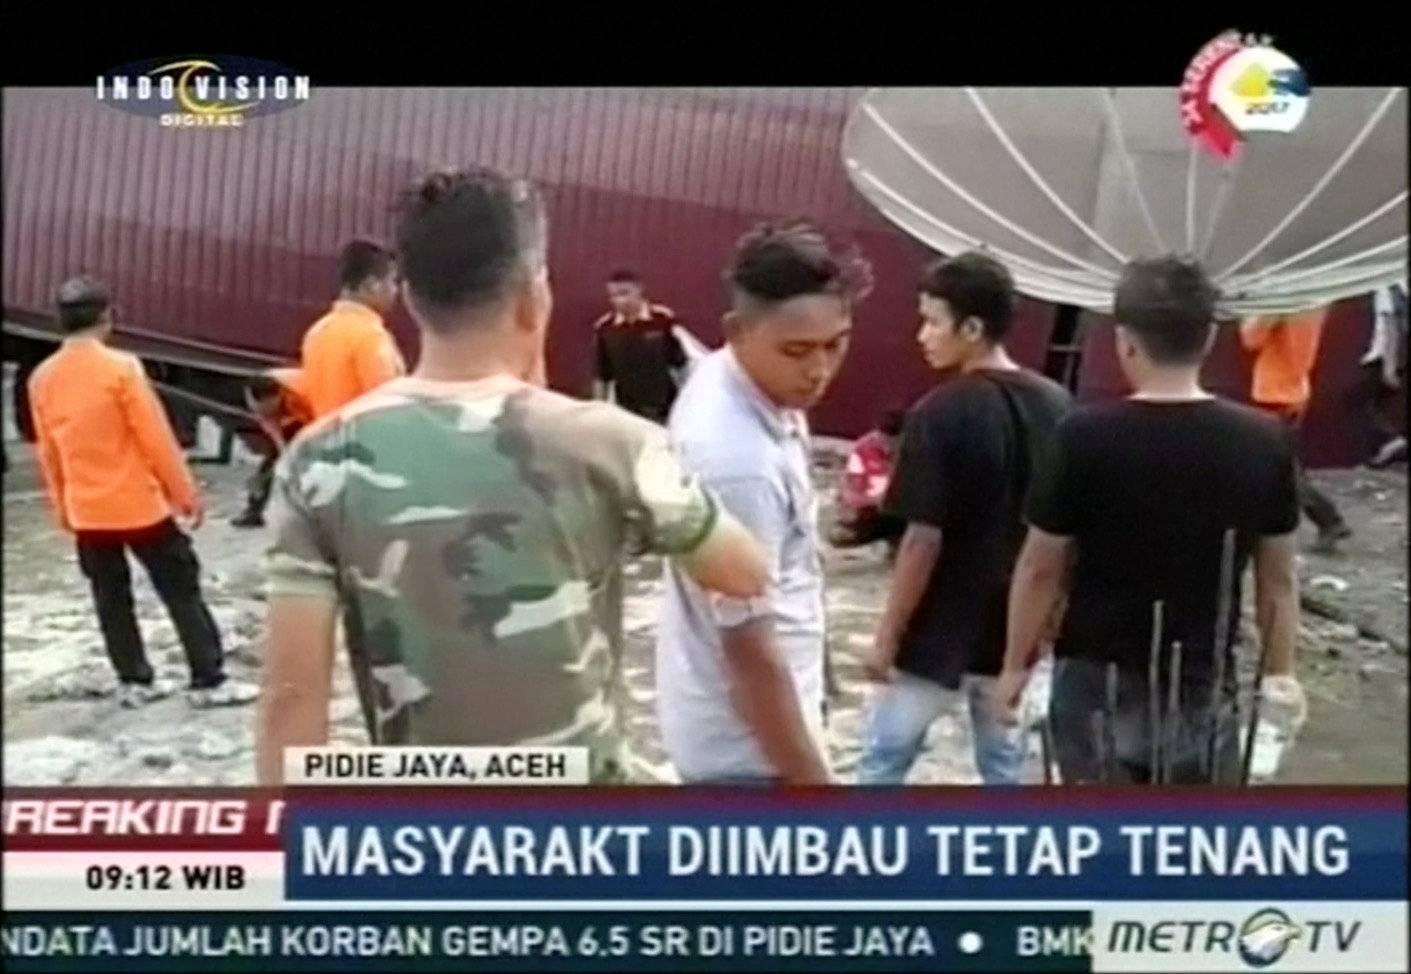 People stand next to a rescue operation conducted following an earthquake in Pidie Jaya, Aceh, Indonesia in this still frame taken from video